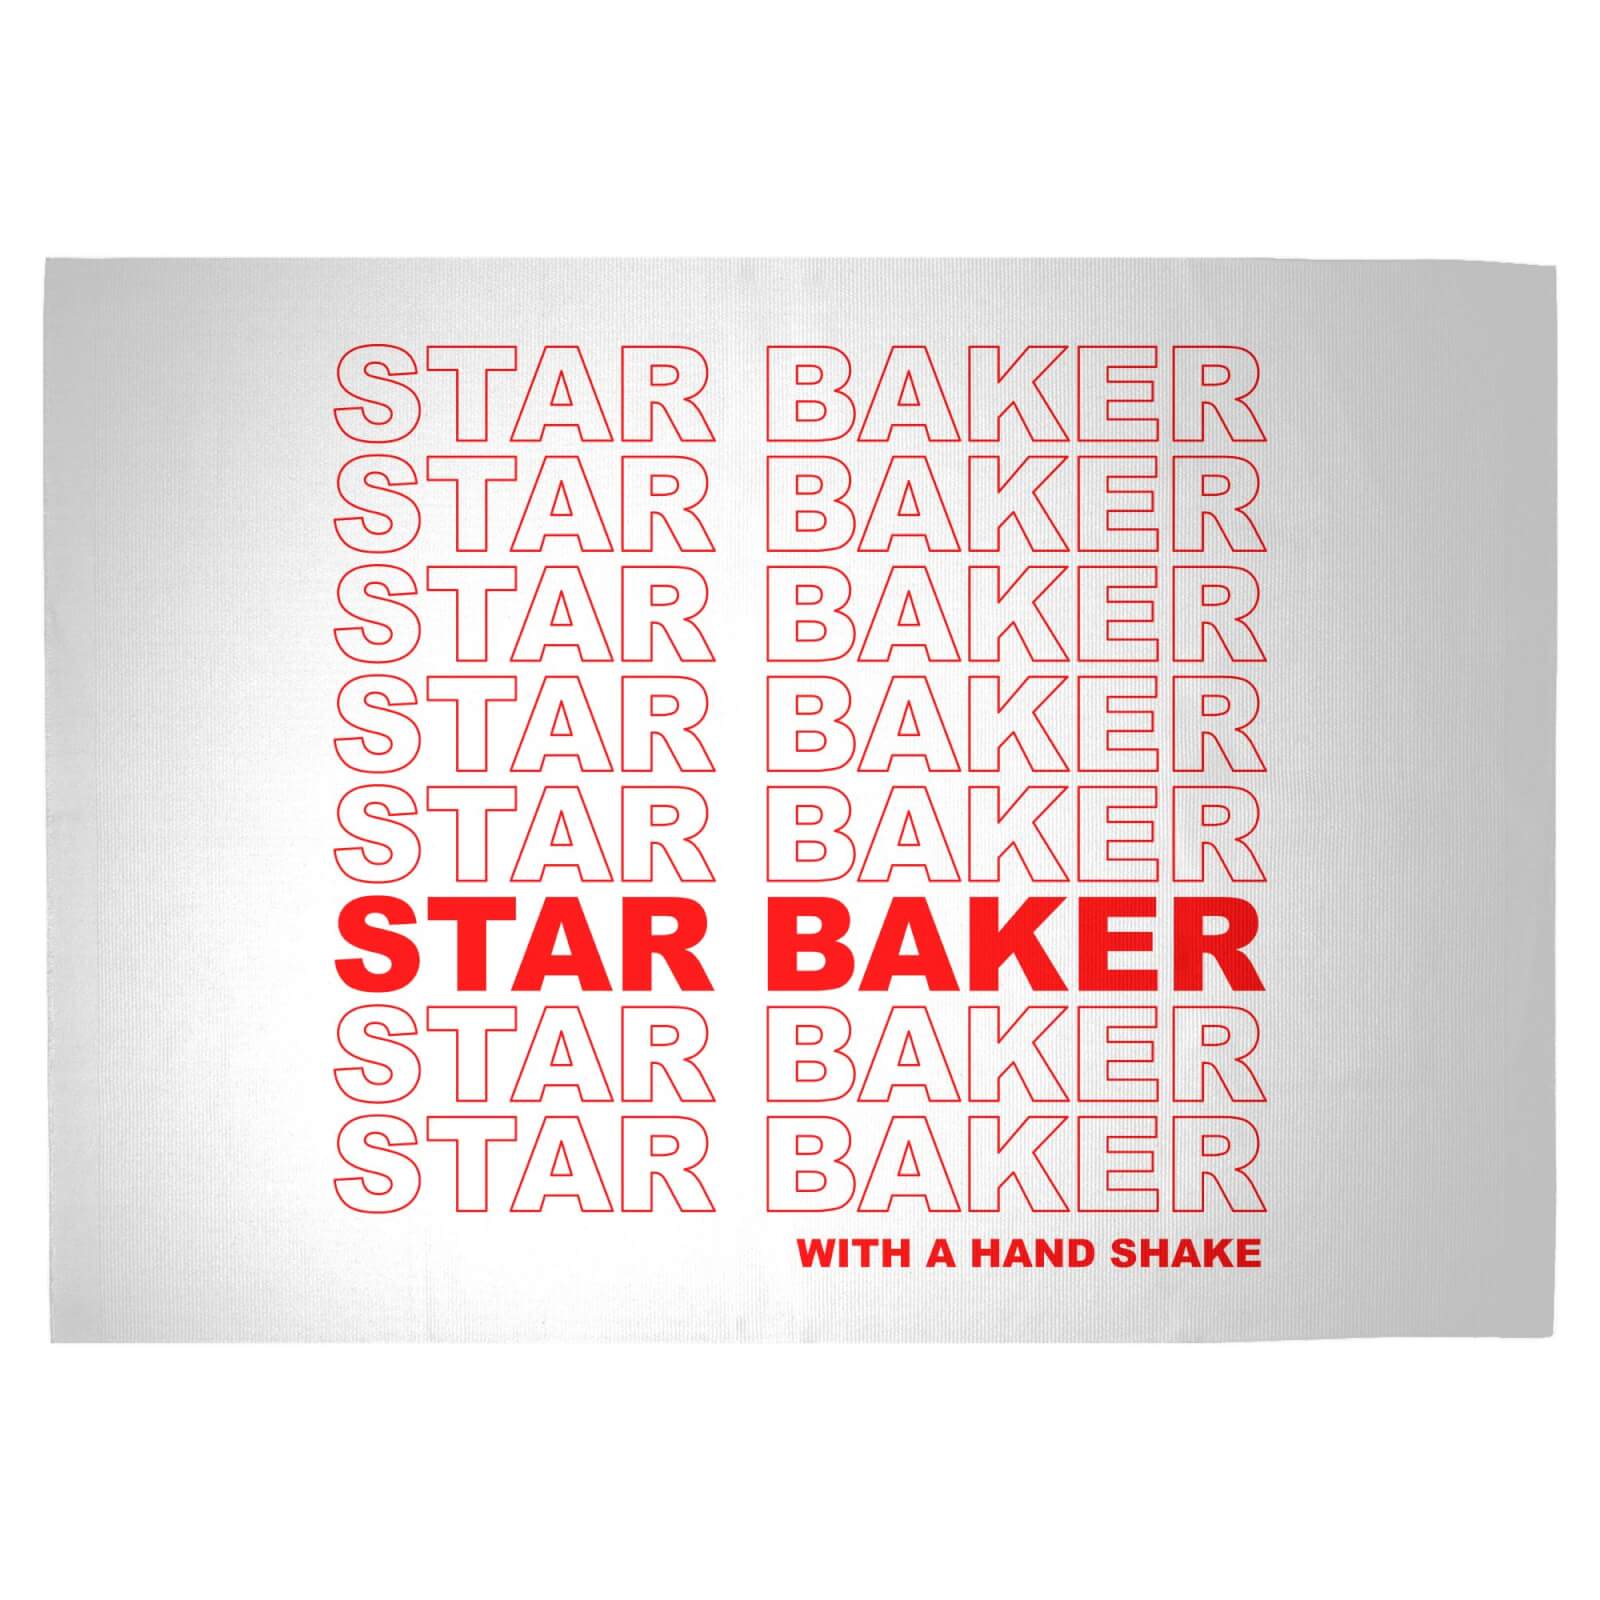 Star Baker With A Hand Shake Woven Rug - Large